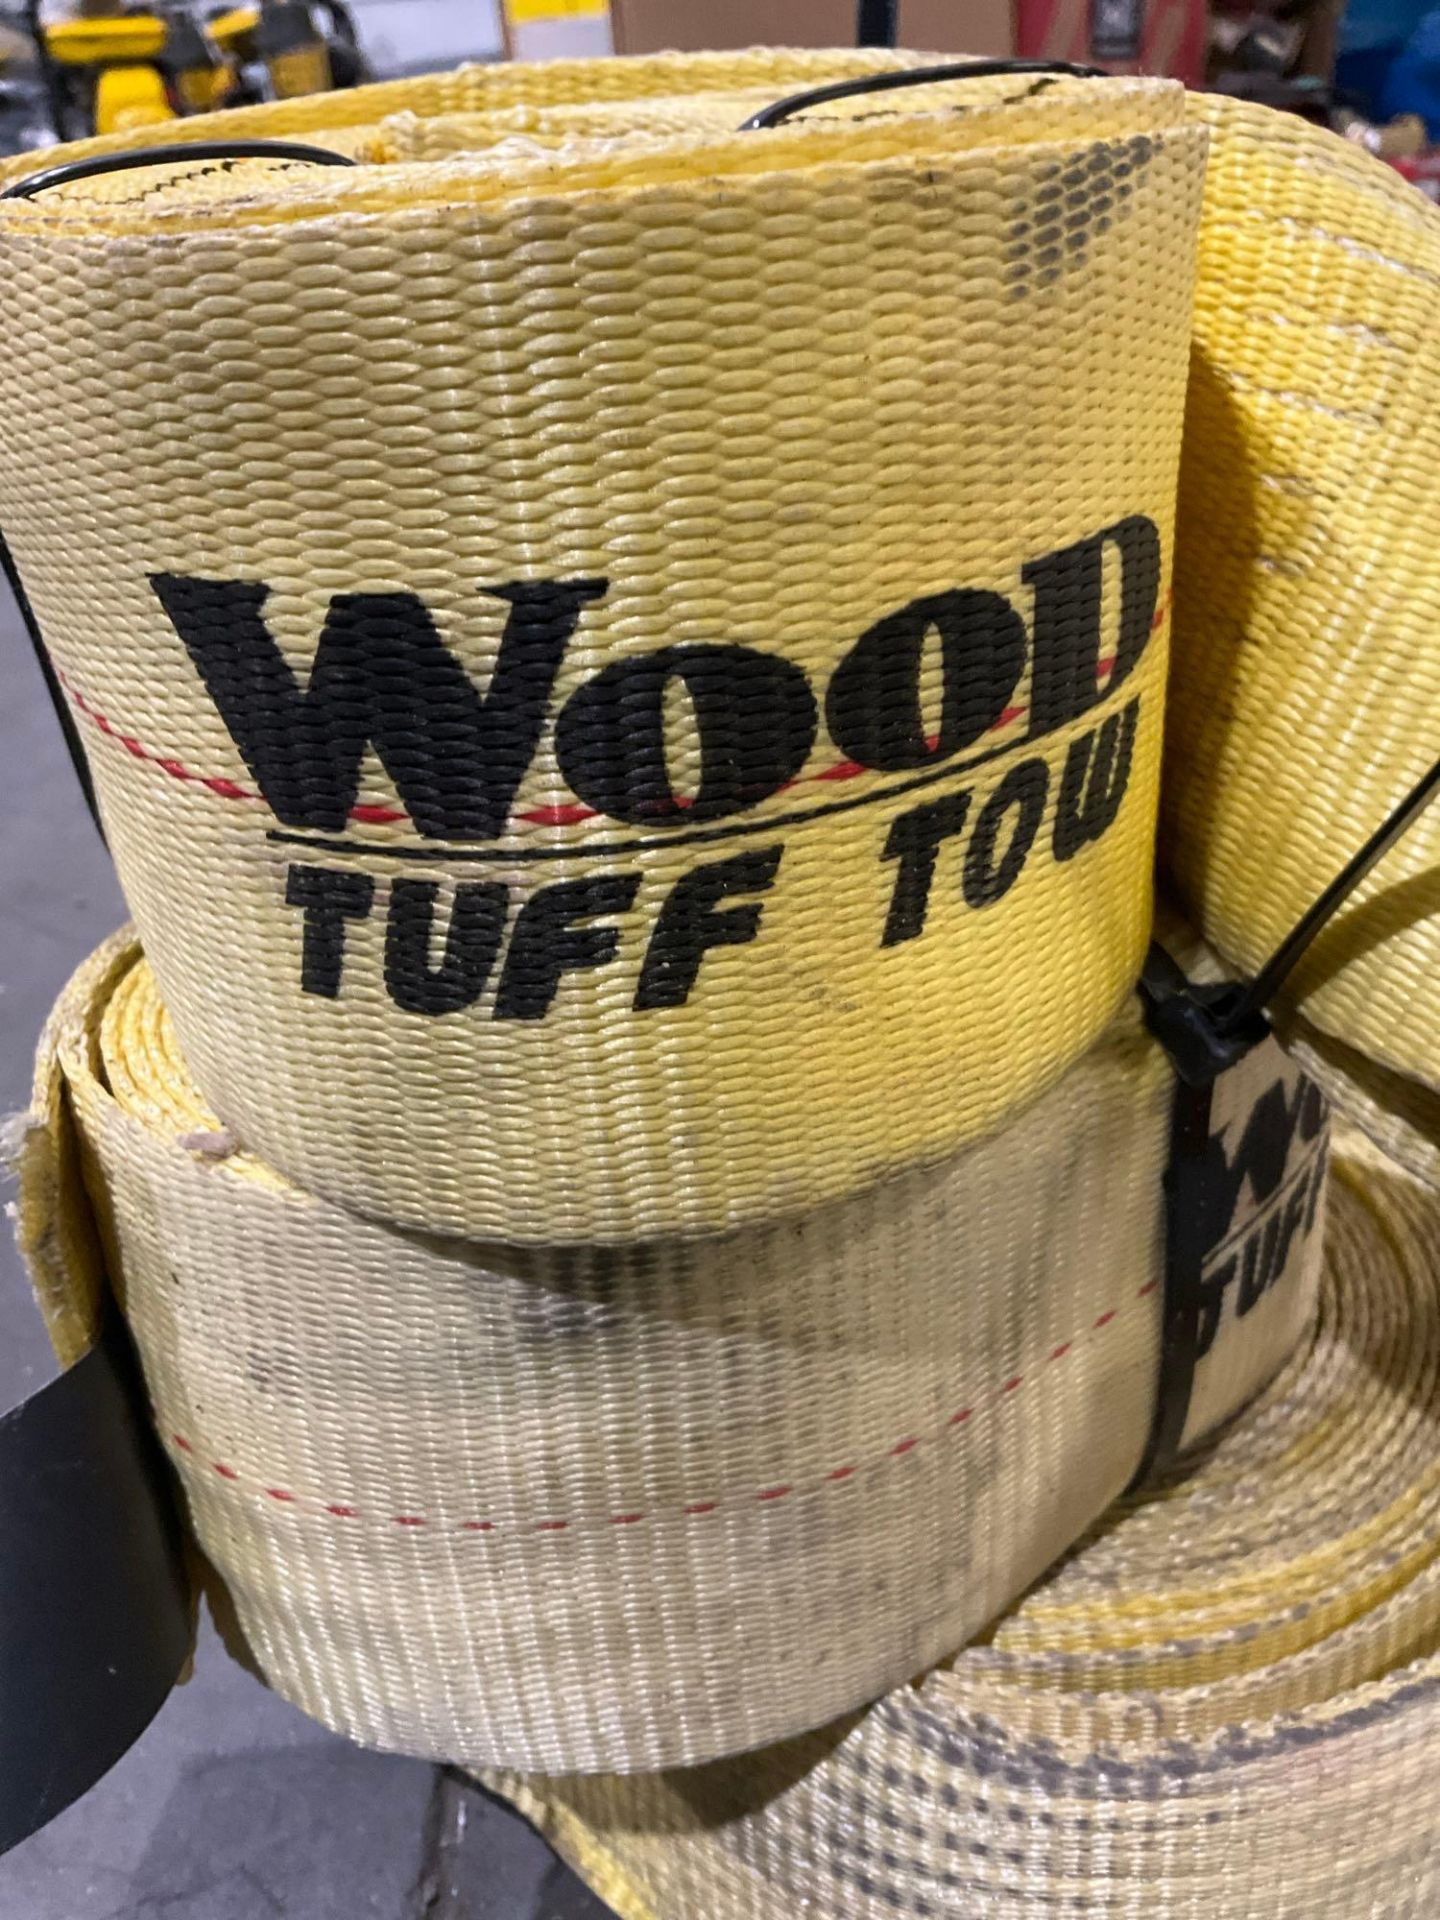 ( 4 ) WOOD TUFF TOW HEAVY DUTY RATCHET TIE DOWNS, APPROX RATED CAPACITY 15,000LBS - Image 4 of 6